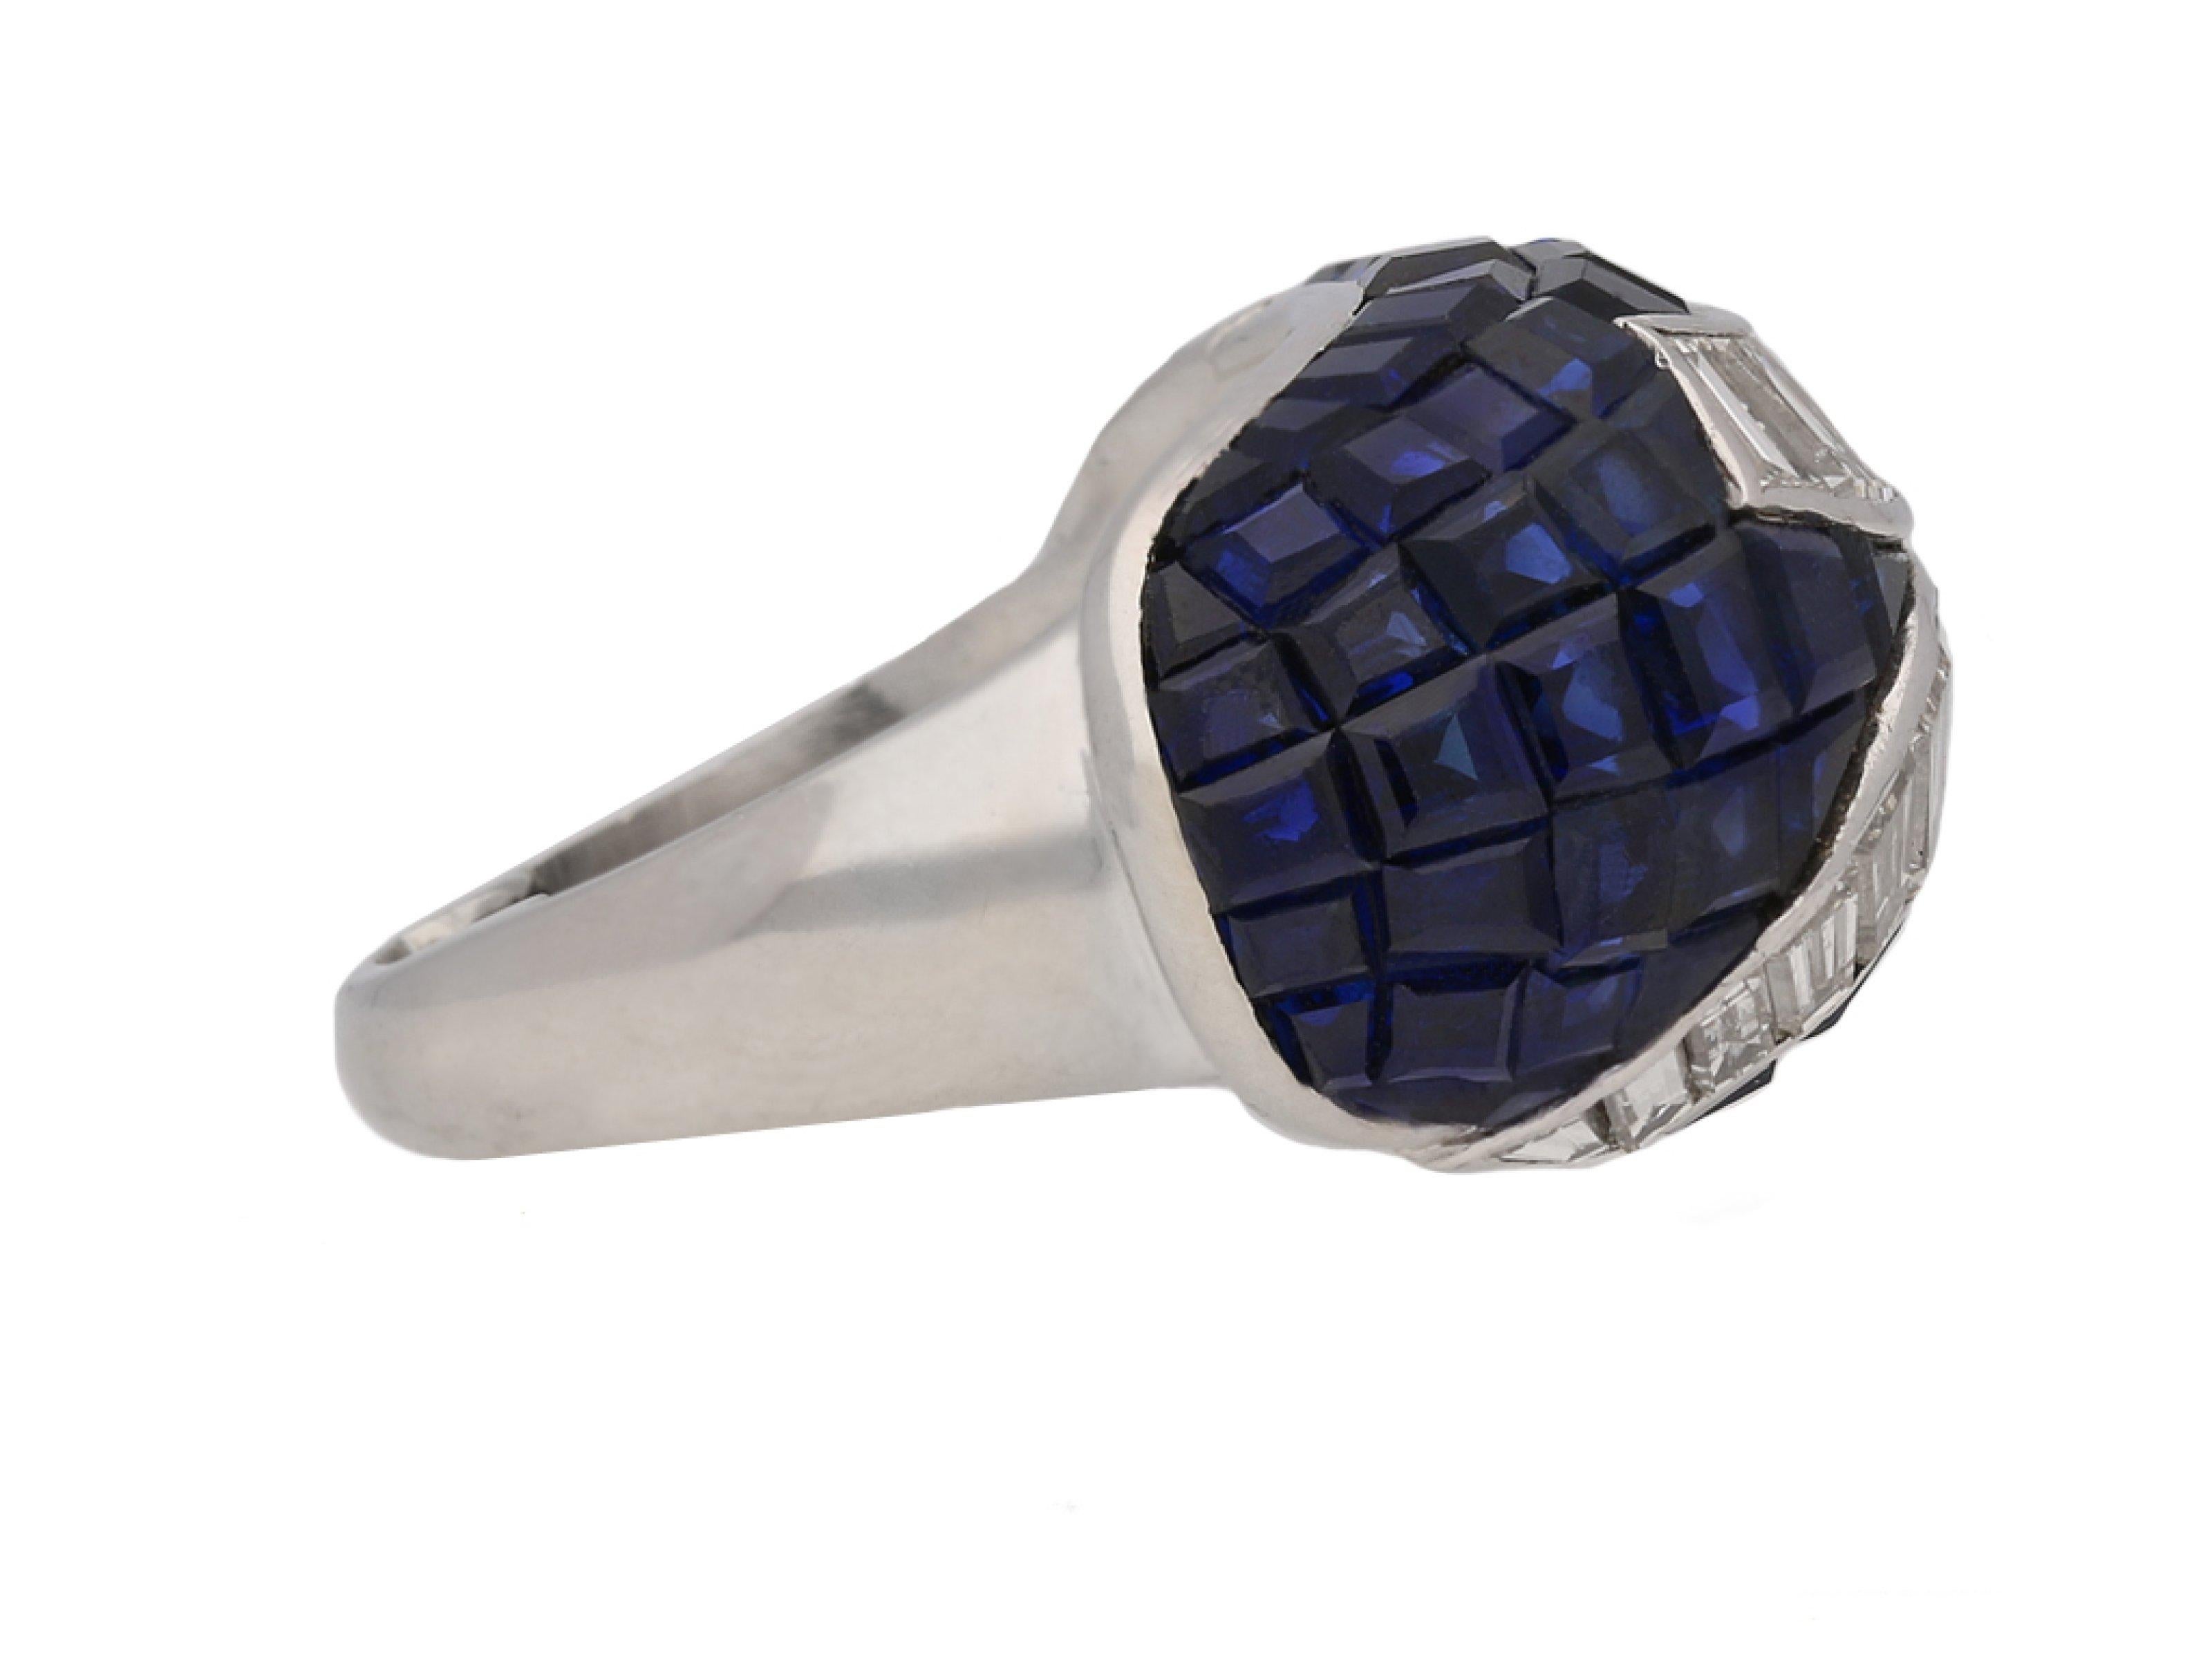 Invisible set sapphire and diamond ring. Set with seventy six tapered baguette cut natural unenhanced sapphires in open back invisible settings with an approximate total weight of 12.50 carats, also embellished with two opposing scrolled elements